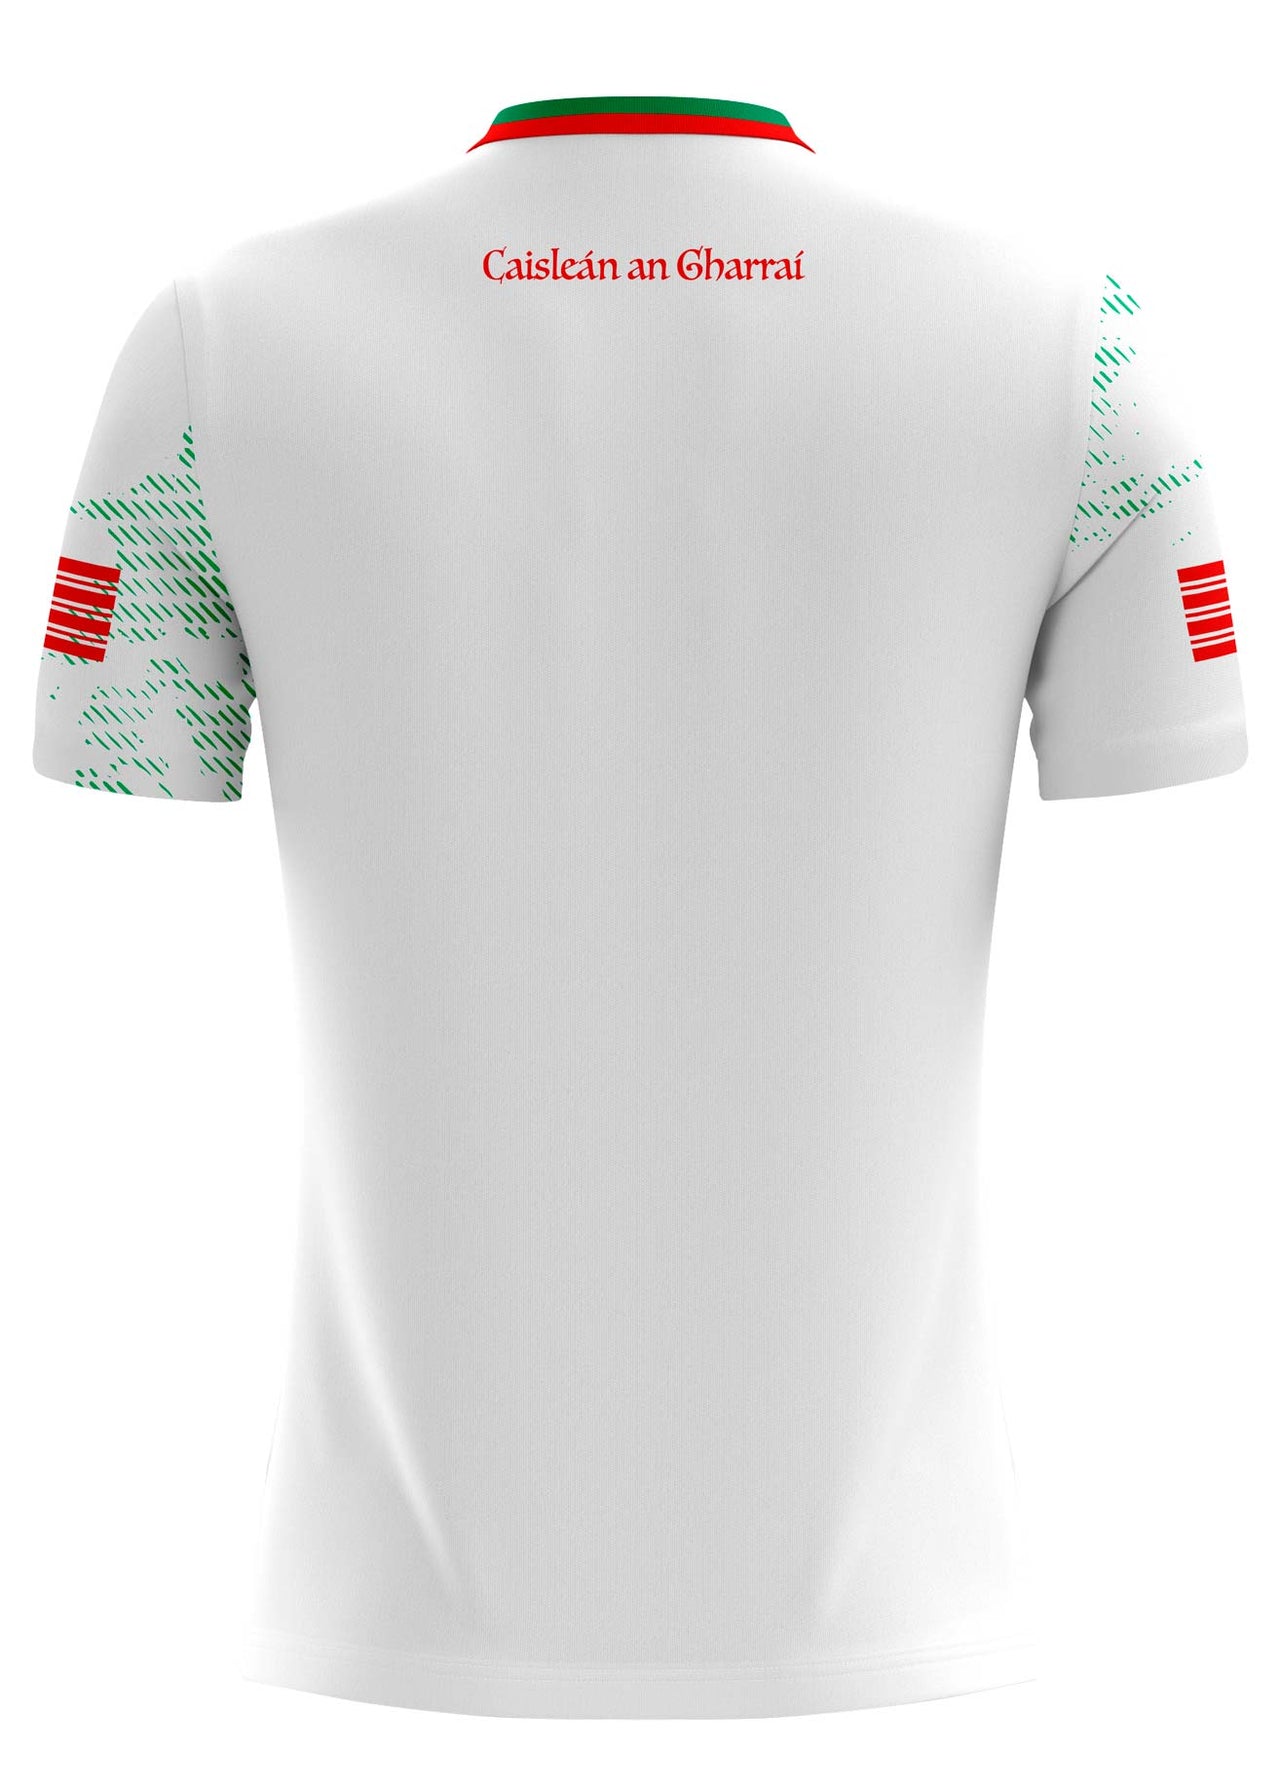 Garrycastle GAA White Replica Jersey Player Fit Adult